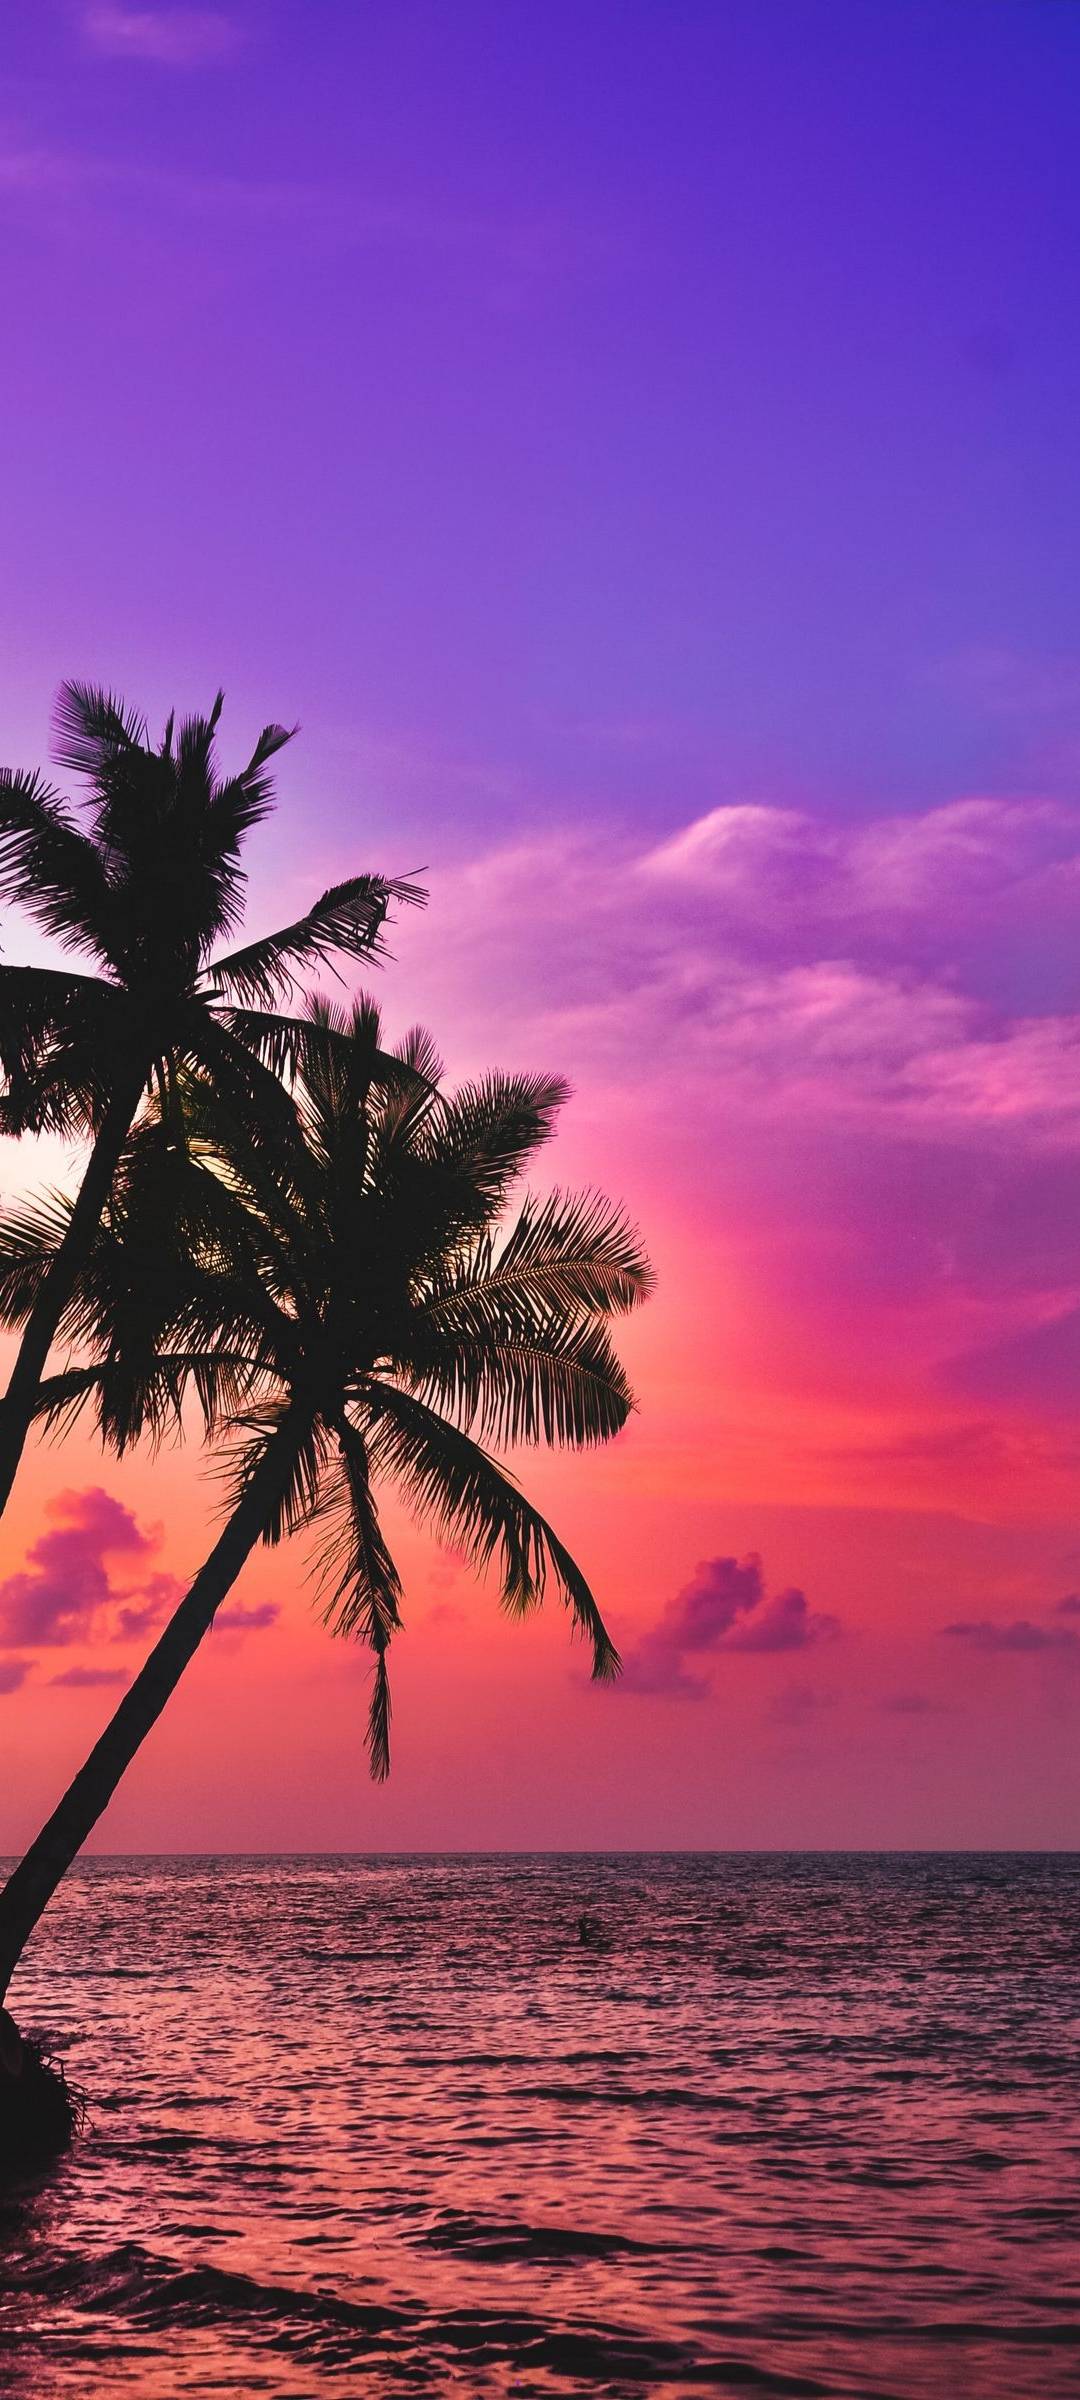 Palm Tree Sunset Pictures  Download Free Images on Unsplash